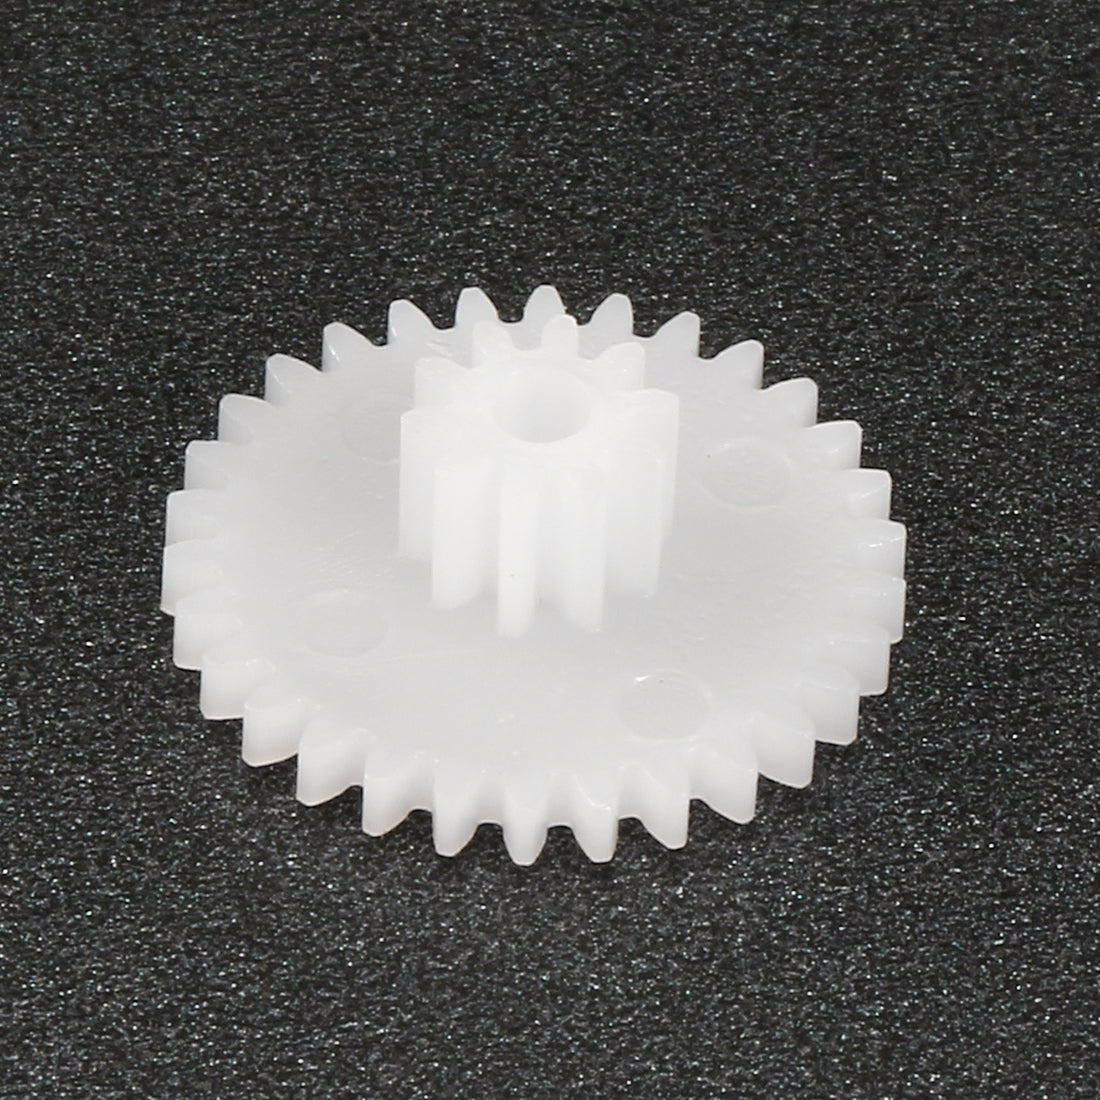 uxcell Uxcell 20Pcs 30102B Plastic Gear Accessories with 30 Teeth for DIY Car Robot Motor